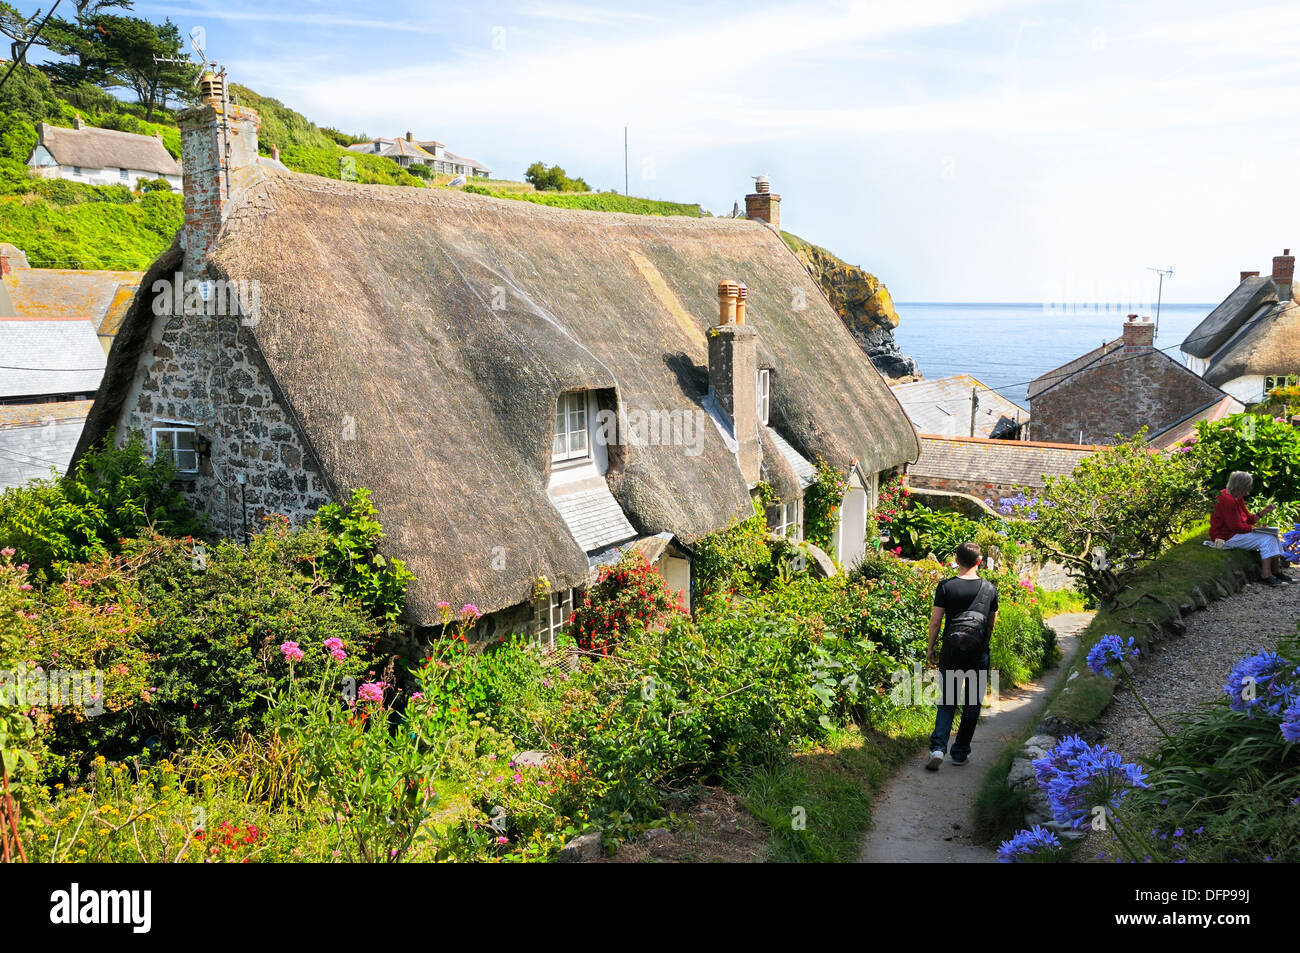 Thatched cottage in the picturesque fishing village of Cadgwith, Lizard Peninsula, Cornwall, UK Stock Photo